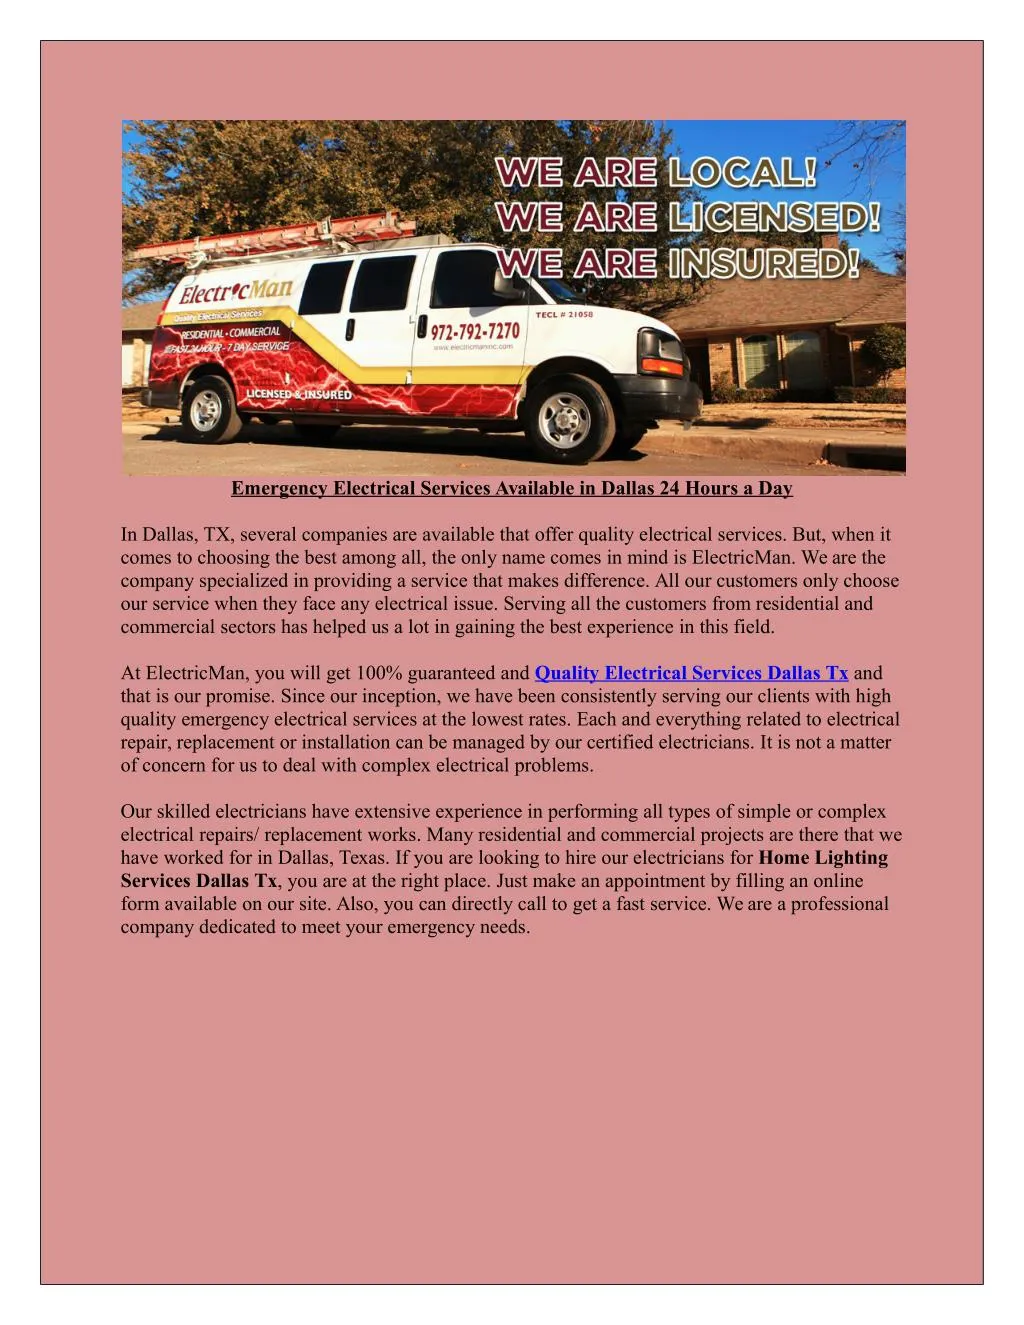 emergency electrical services available in dallas